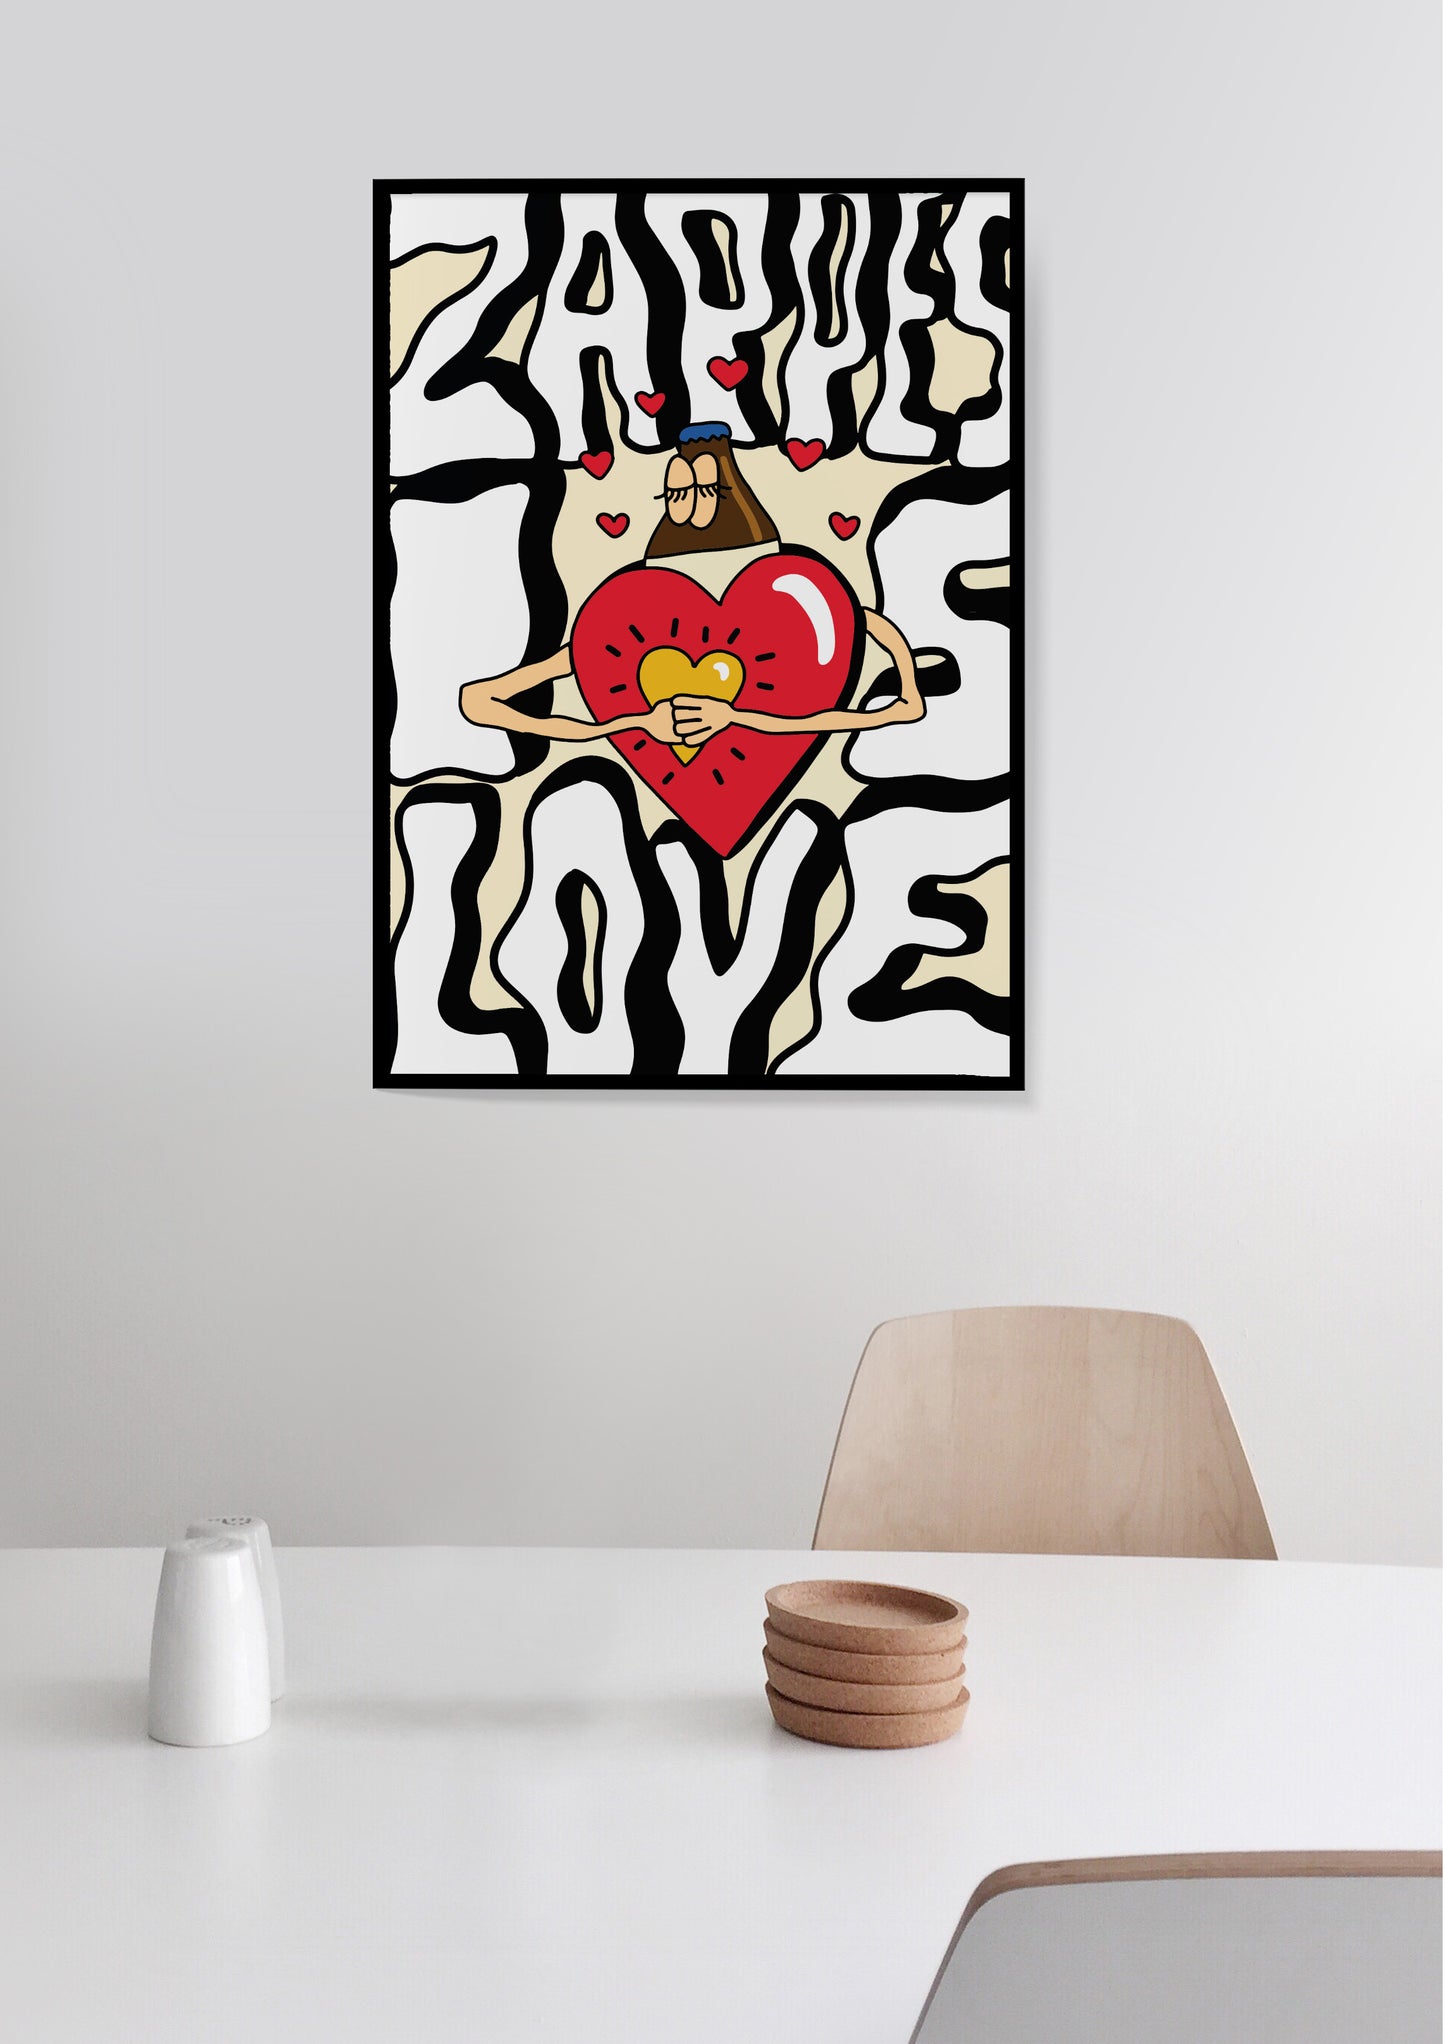 Art Print "Zappes is Love" | Fred Nussbaum